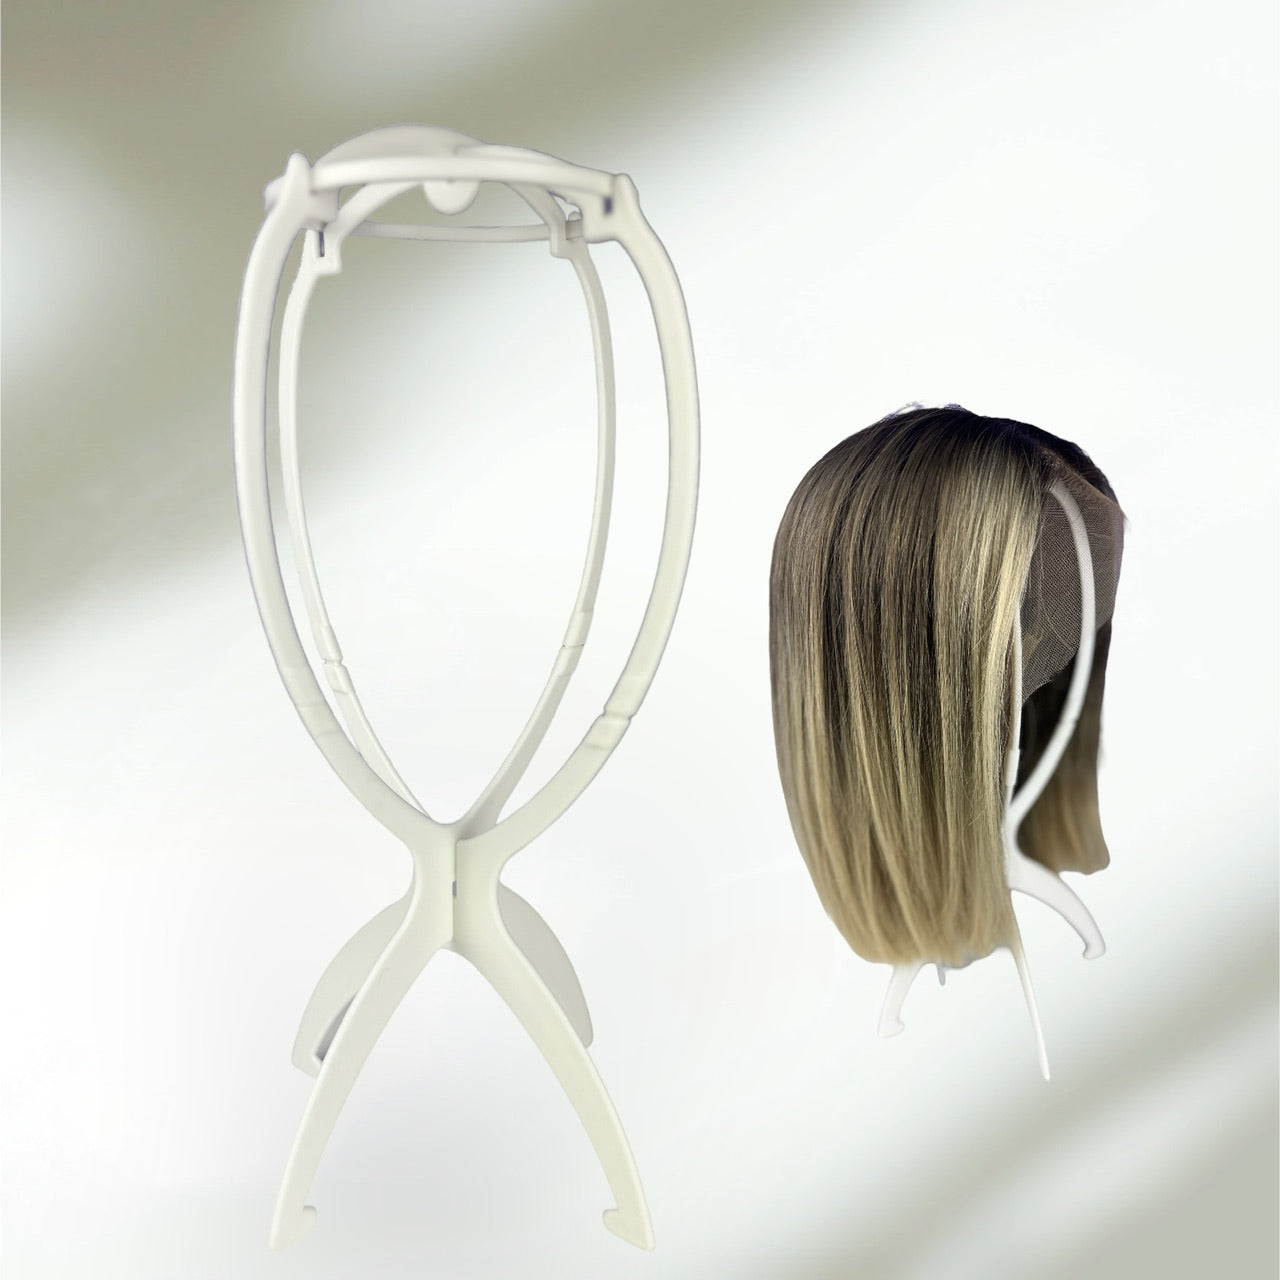 Wig stand